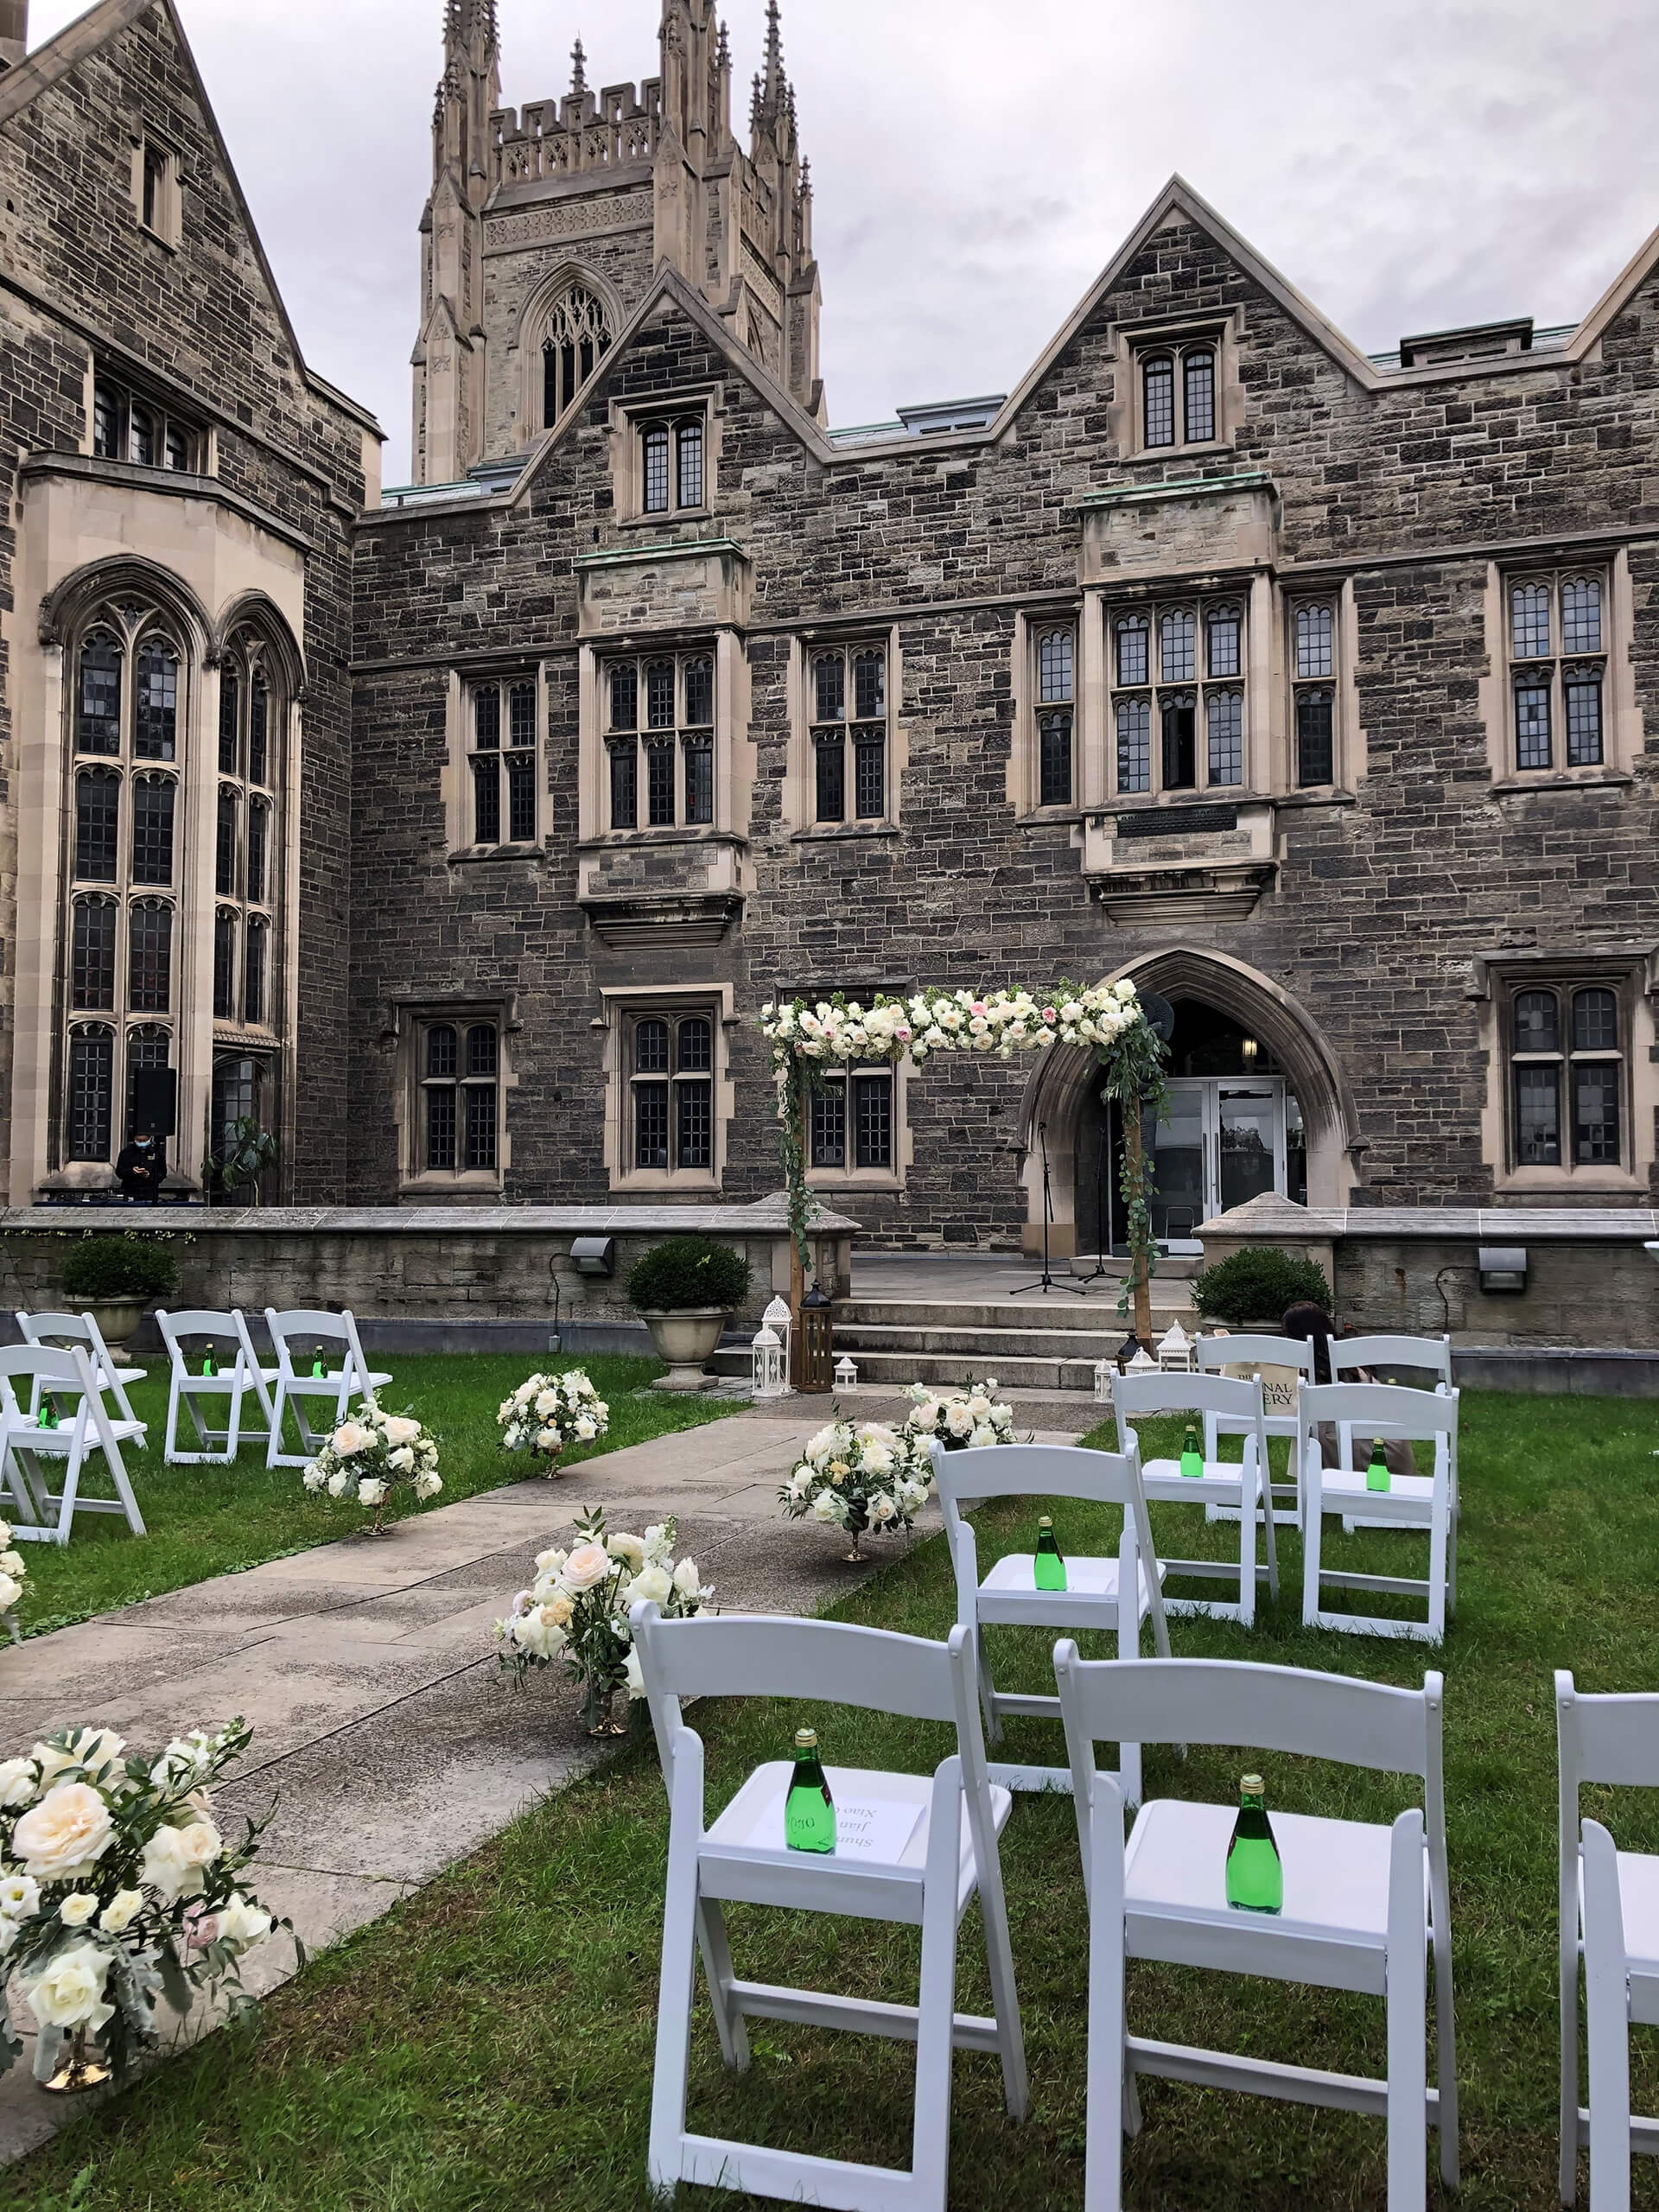 The Hart House Quad and greenery in the sunshine, with seating arranged for a ceremony